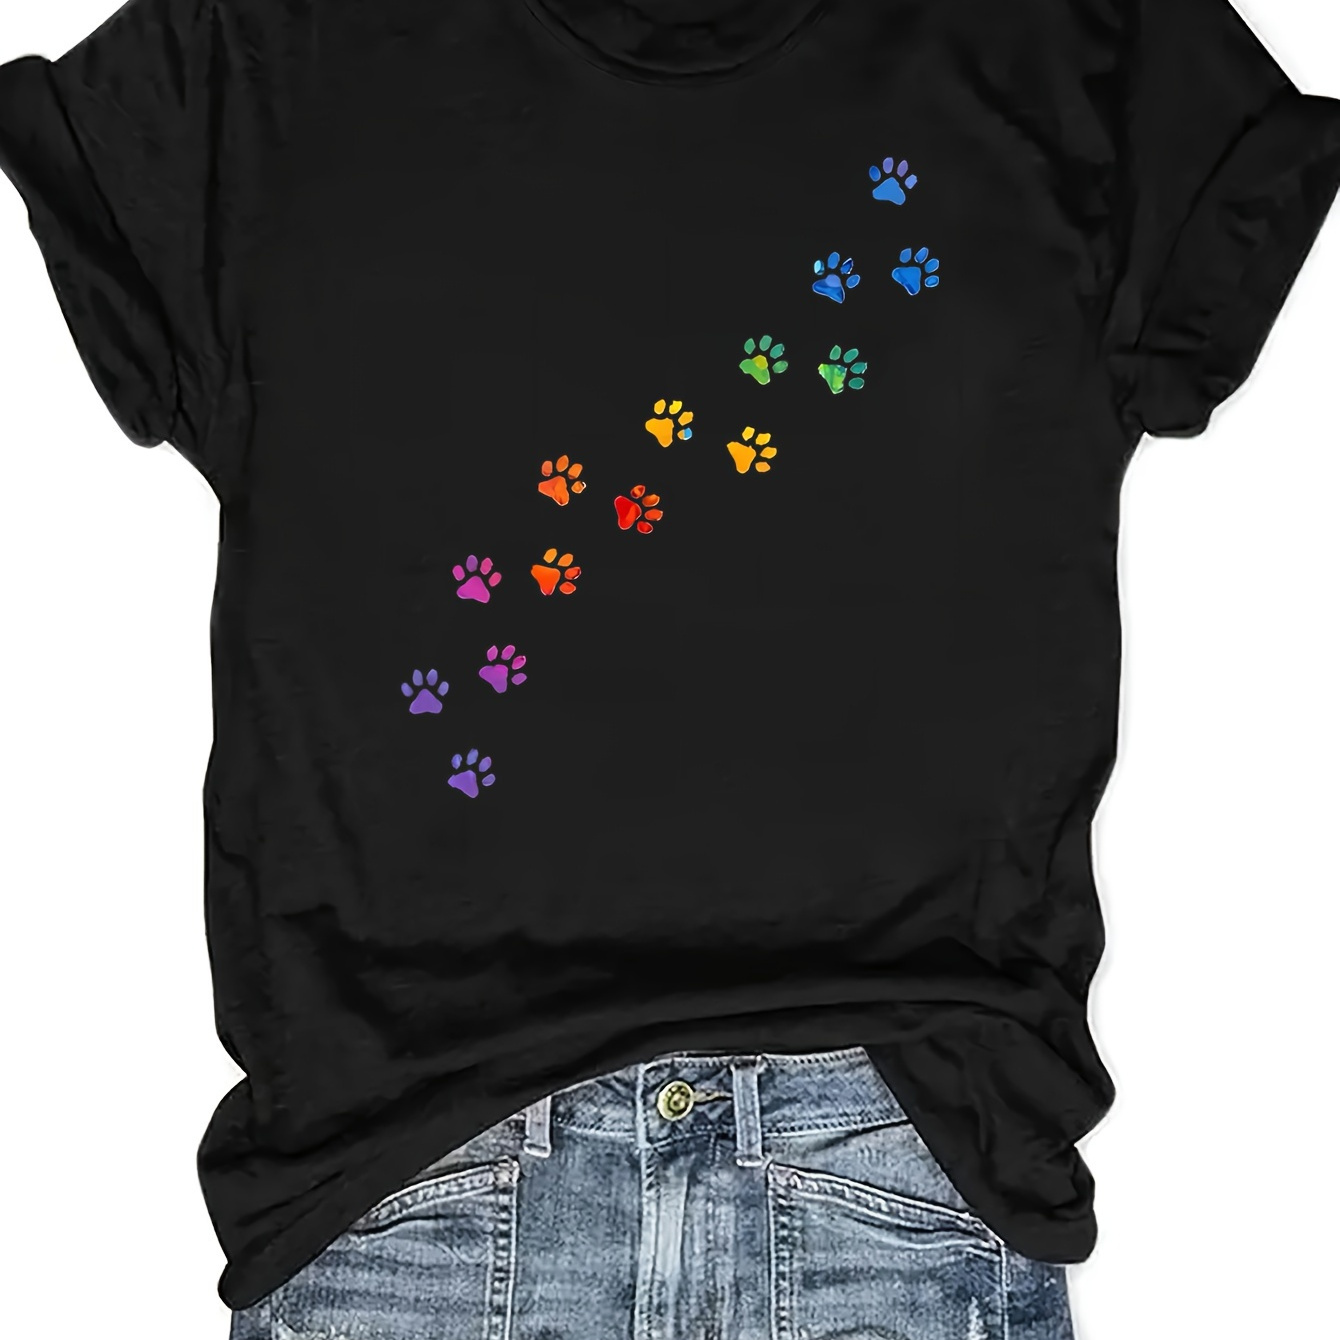 

Colorful Paw Print Crew Neck T-shirt, Casual Short Sleeve T-shirt For Spring & Summer, Women's Clothing